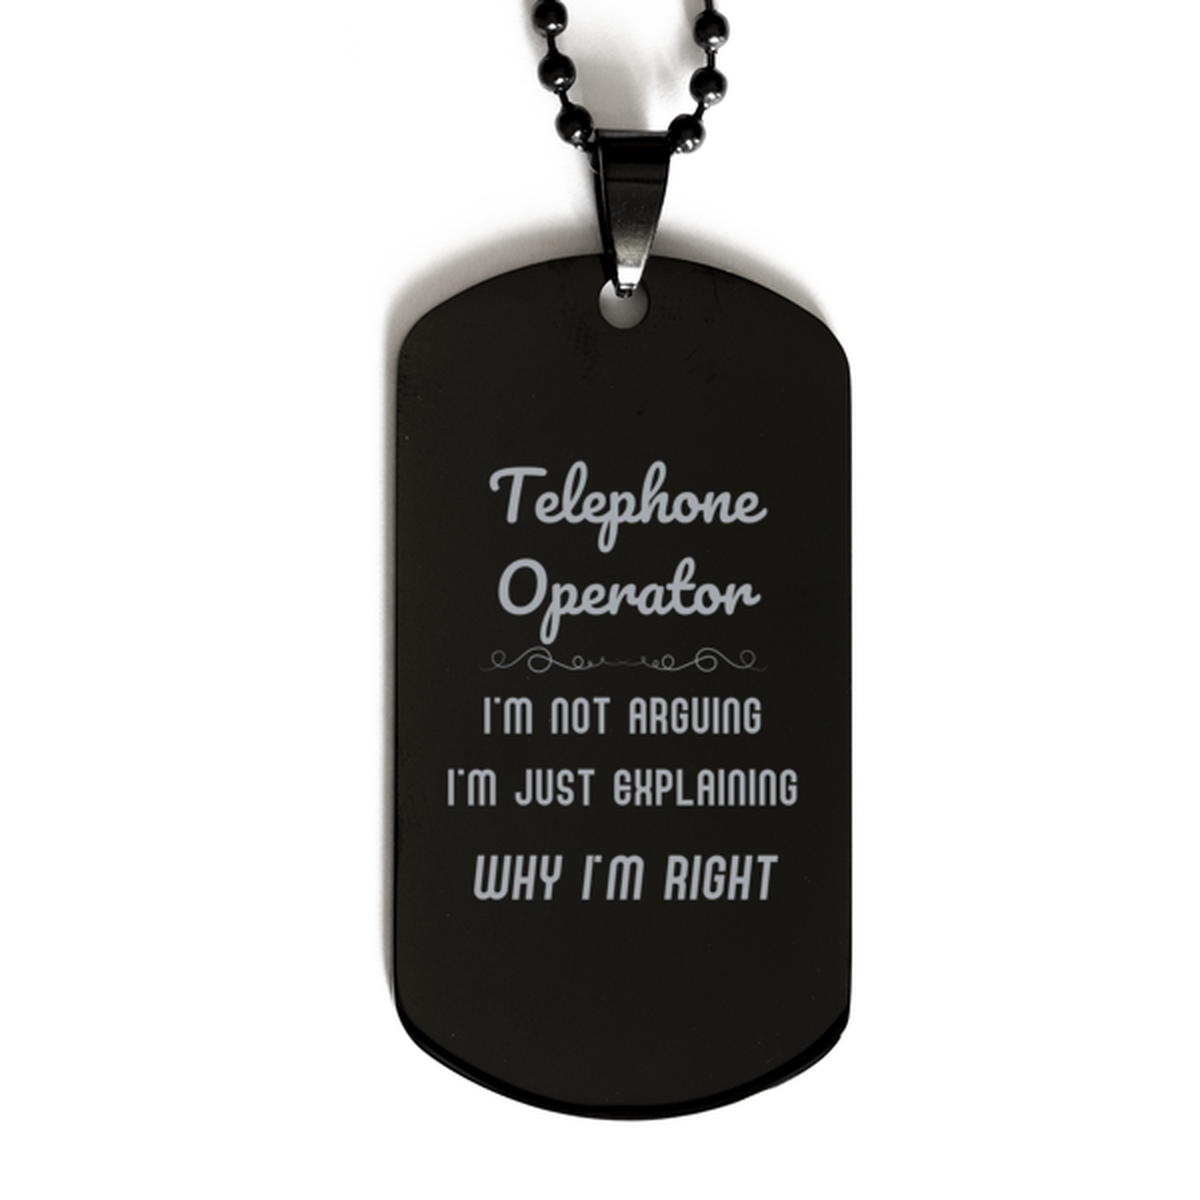 Telephone Operator I'm not Arguing. I'm Just Explaining Why I'm RIGHT Black Dog Tag, Funny Saying Quote Telephone Operator Gifts For Telephone Operator Graduation Birthday Christmas Gifts for Men Women Coworker